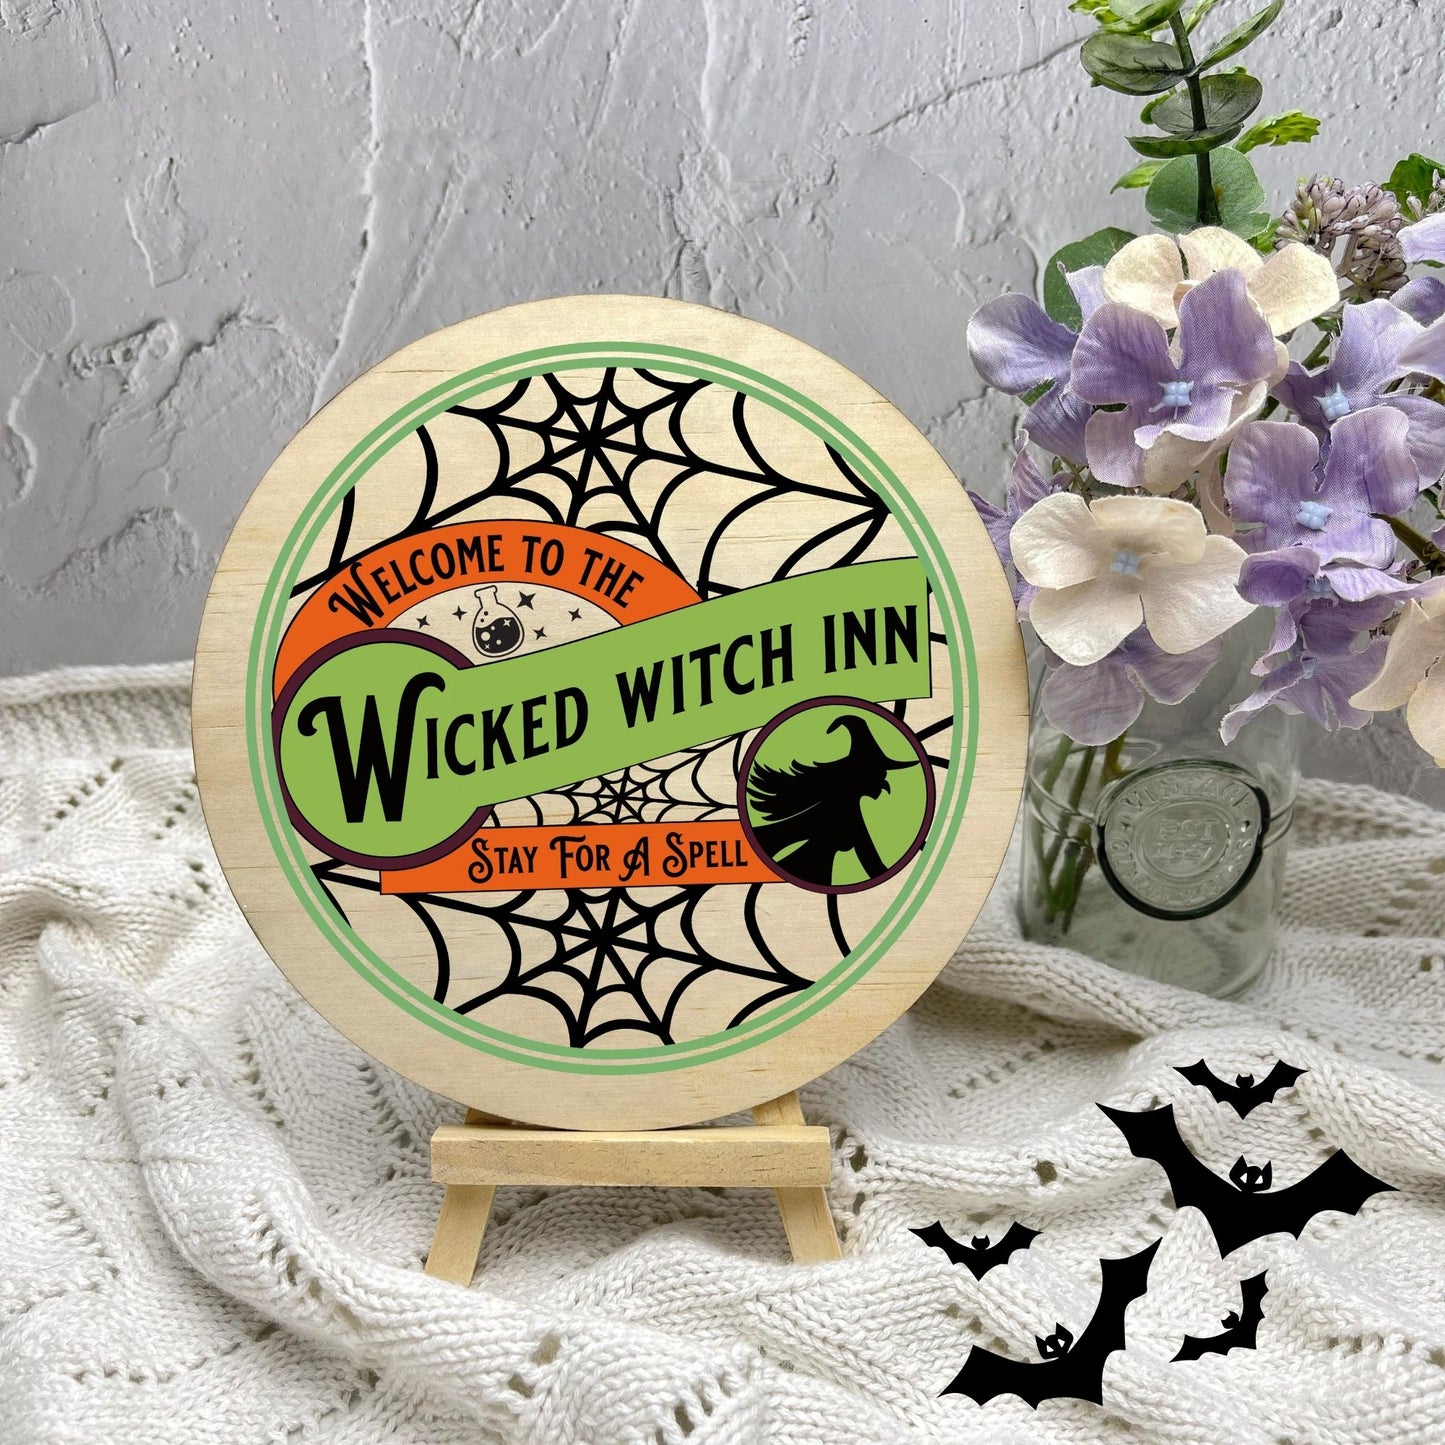 Wicked witch inn sign, Halloween Decor, Spooky Vibes, hocus pocus sign, trick or treat decor, haunted house h56